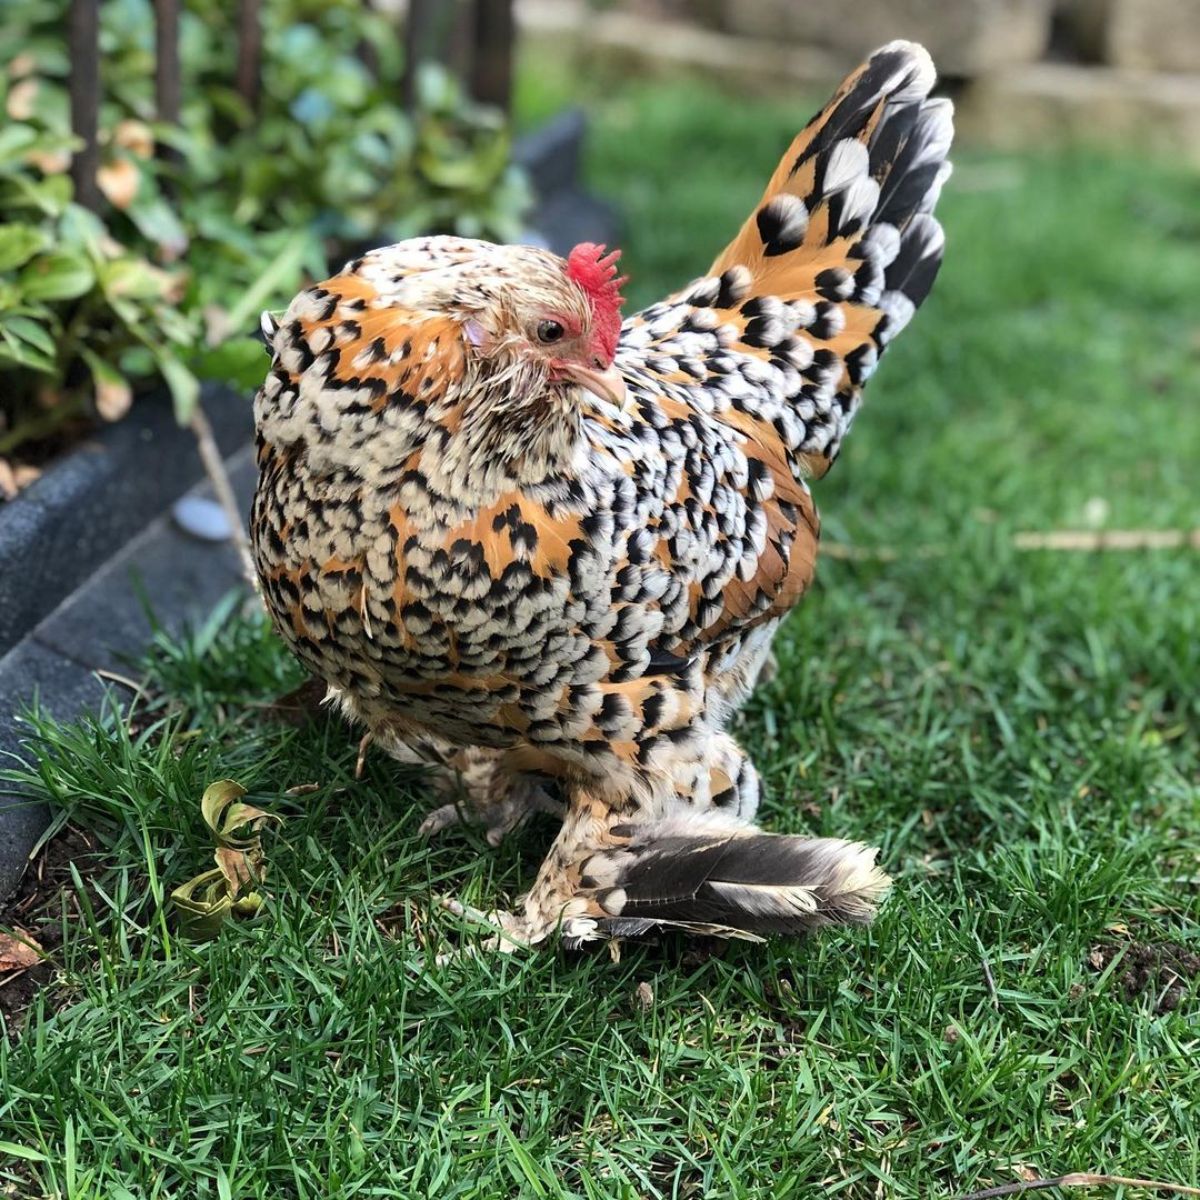 An adorable speckled Belgian Bearded d’Uccle hen in a backyard.